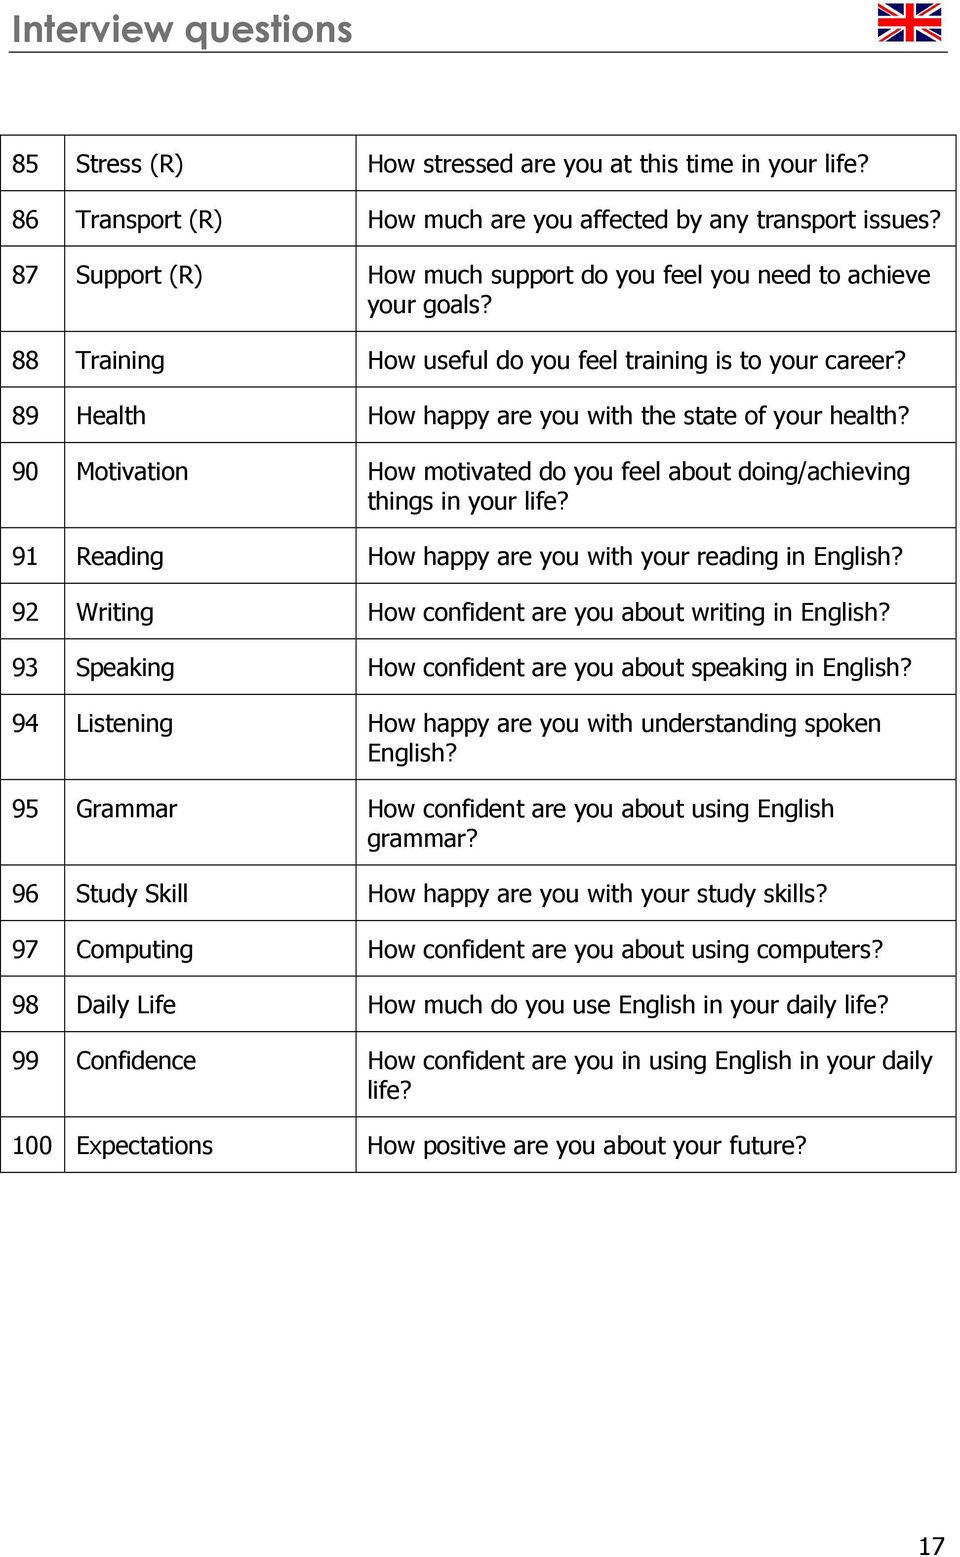 90 Motivation How motivated do you feel about doing/achieving things in your life? 91 Reading How happy are you with your reading in English? 92 Writing How confident are you about writing in English?